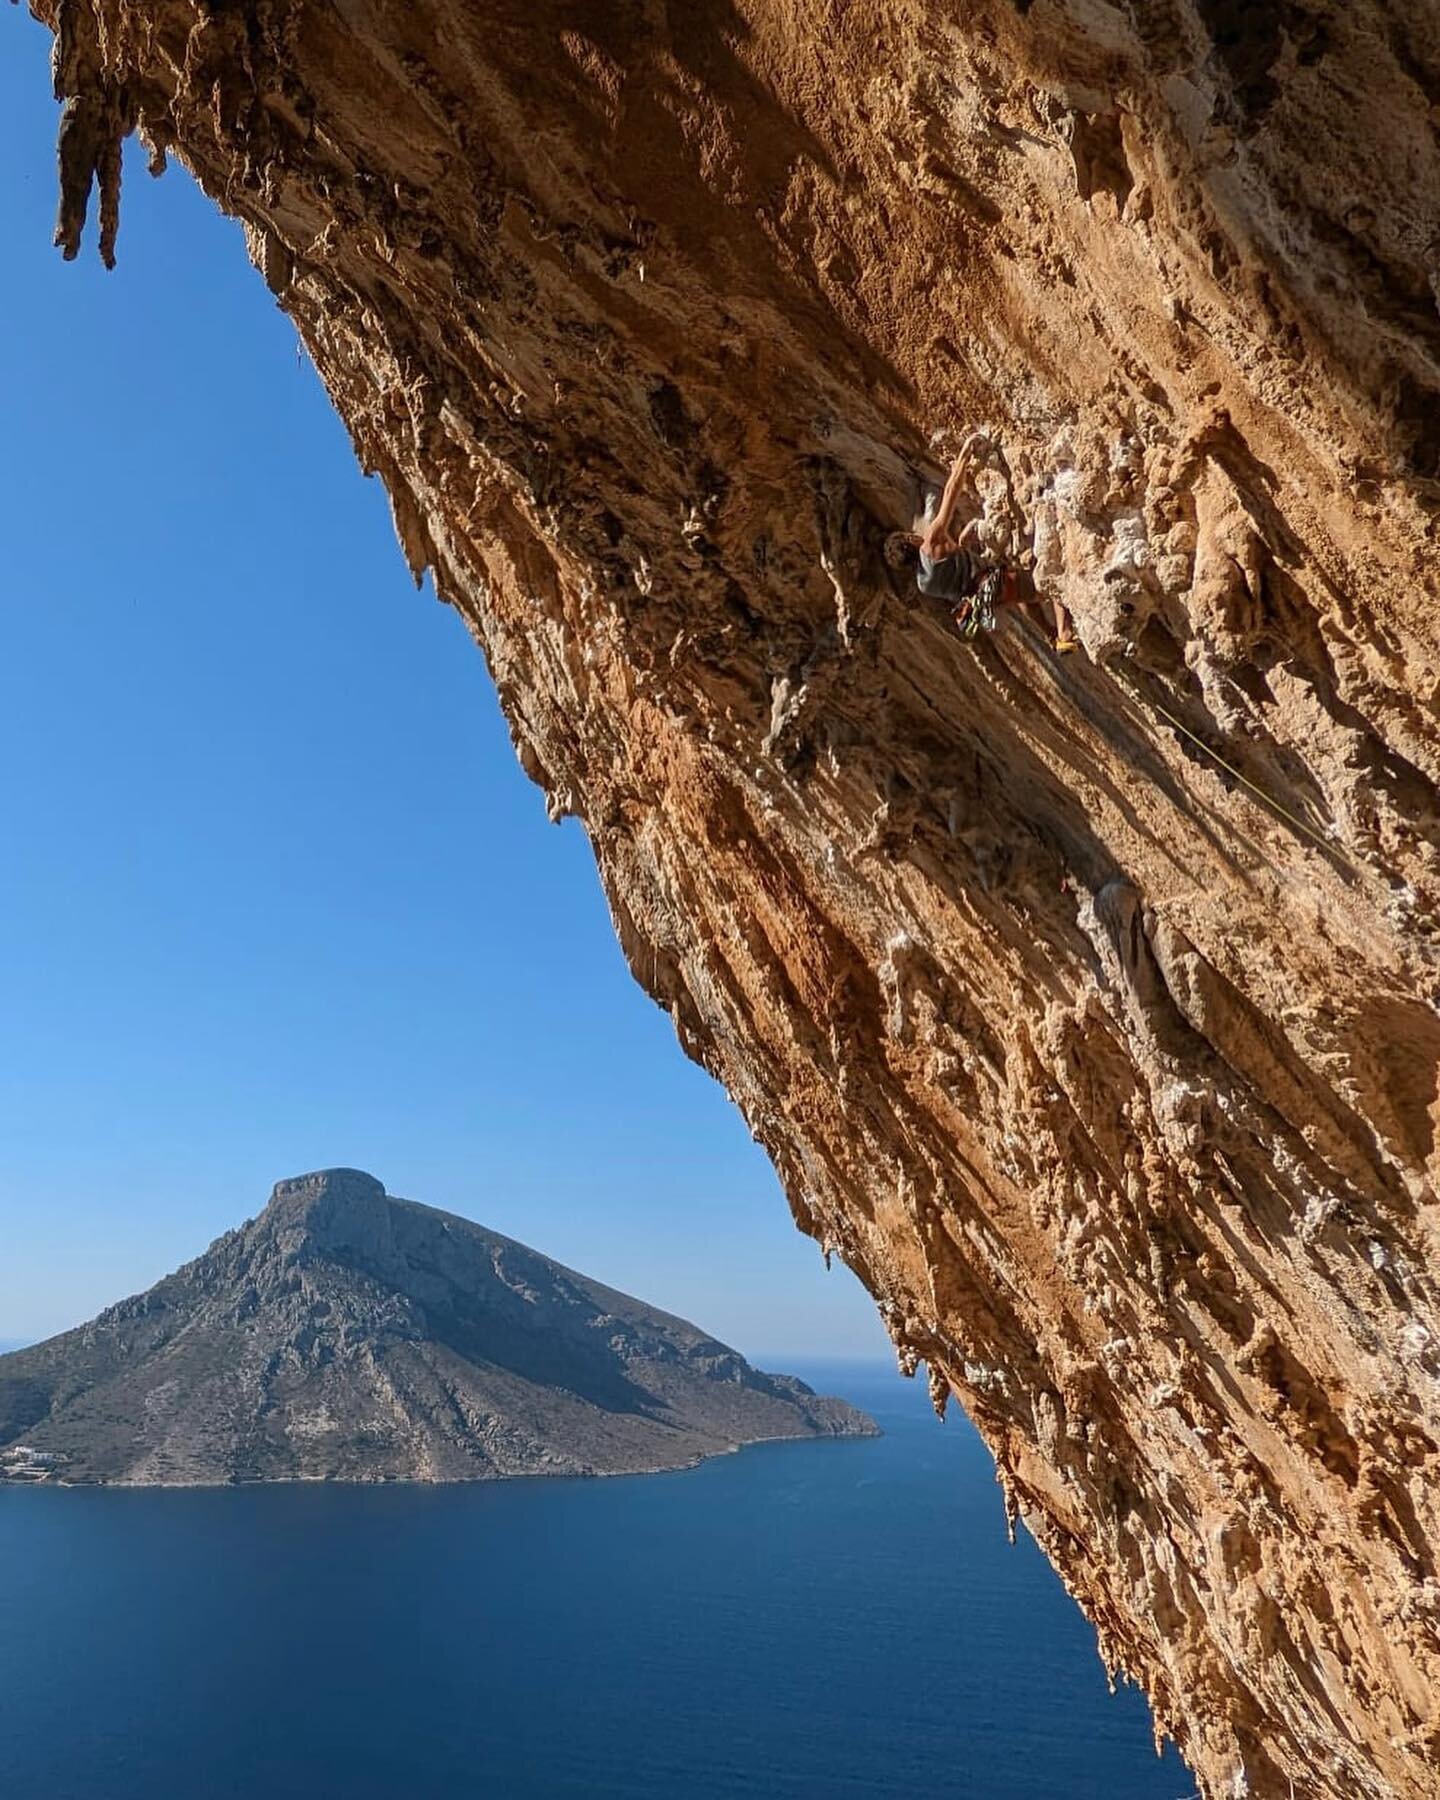 We came, we saw, we tufa&rsquo;d, then we passed out in the street with our tongues out, and it&rsquo;s only Day 1. You&rsquo;re alright Kalymnos - you&rsquo;re alright. 

My only regret is being so tired I forgot my knee pads, but it&rsquo;s a mista